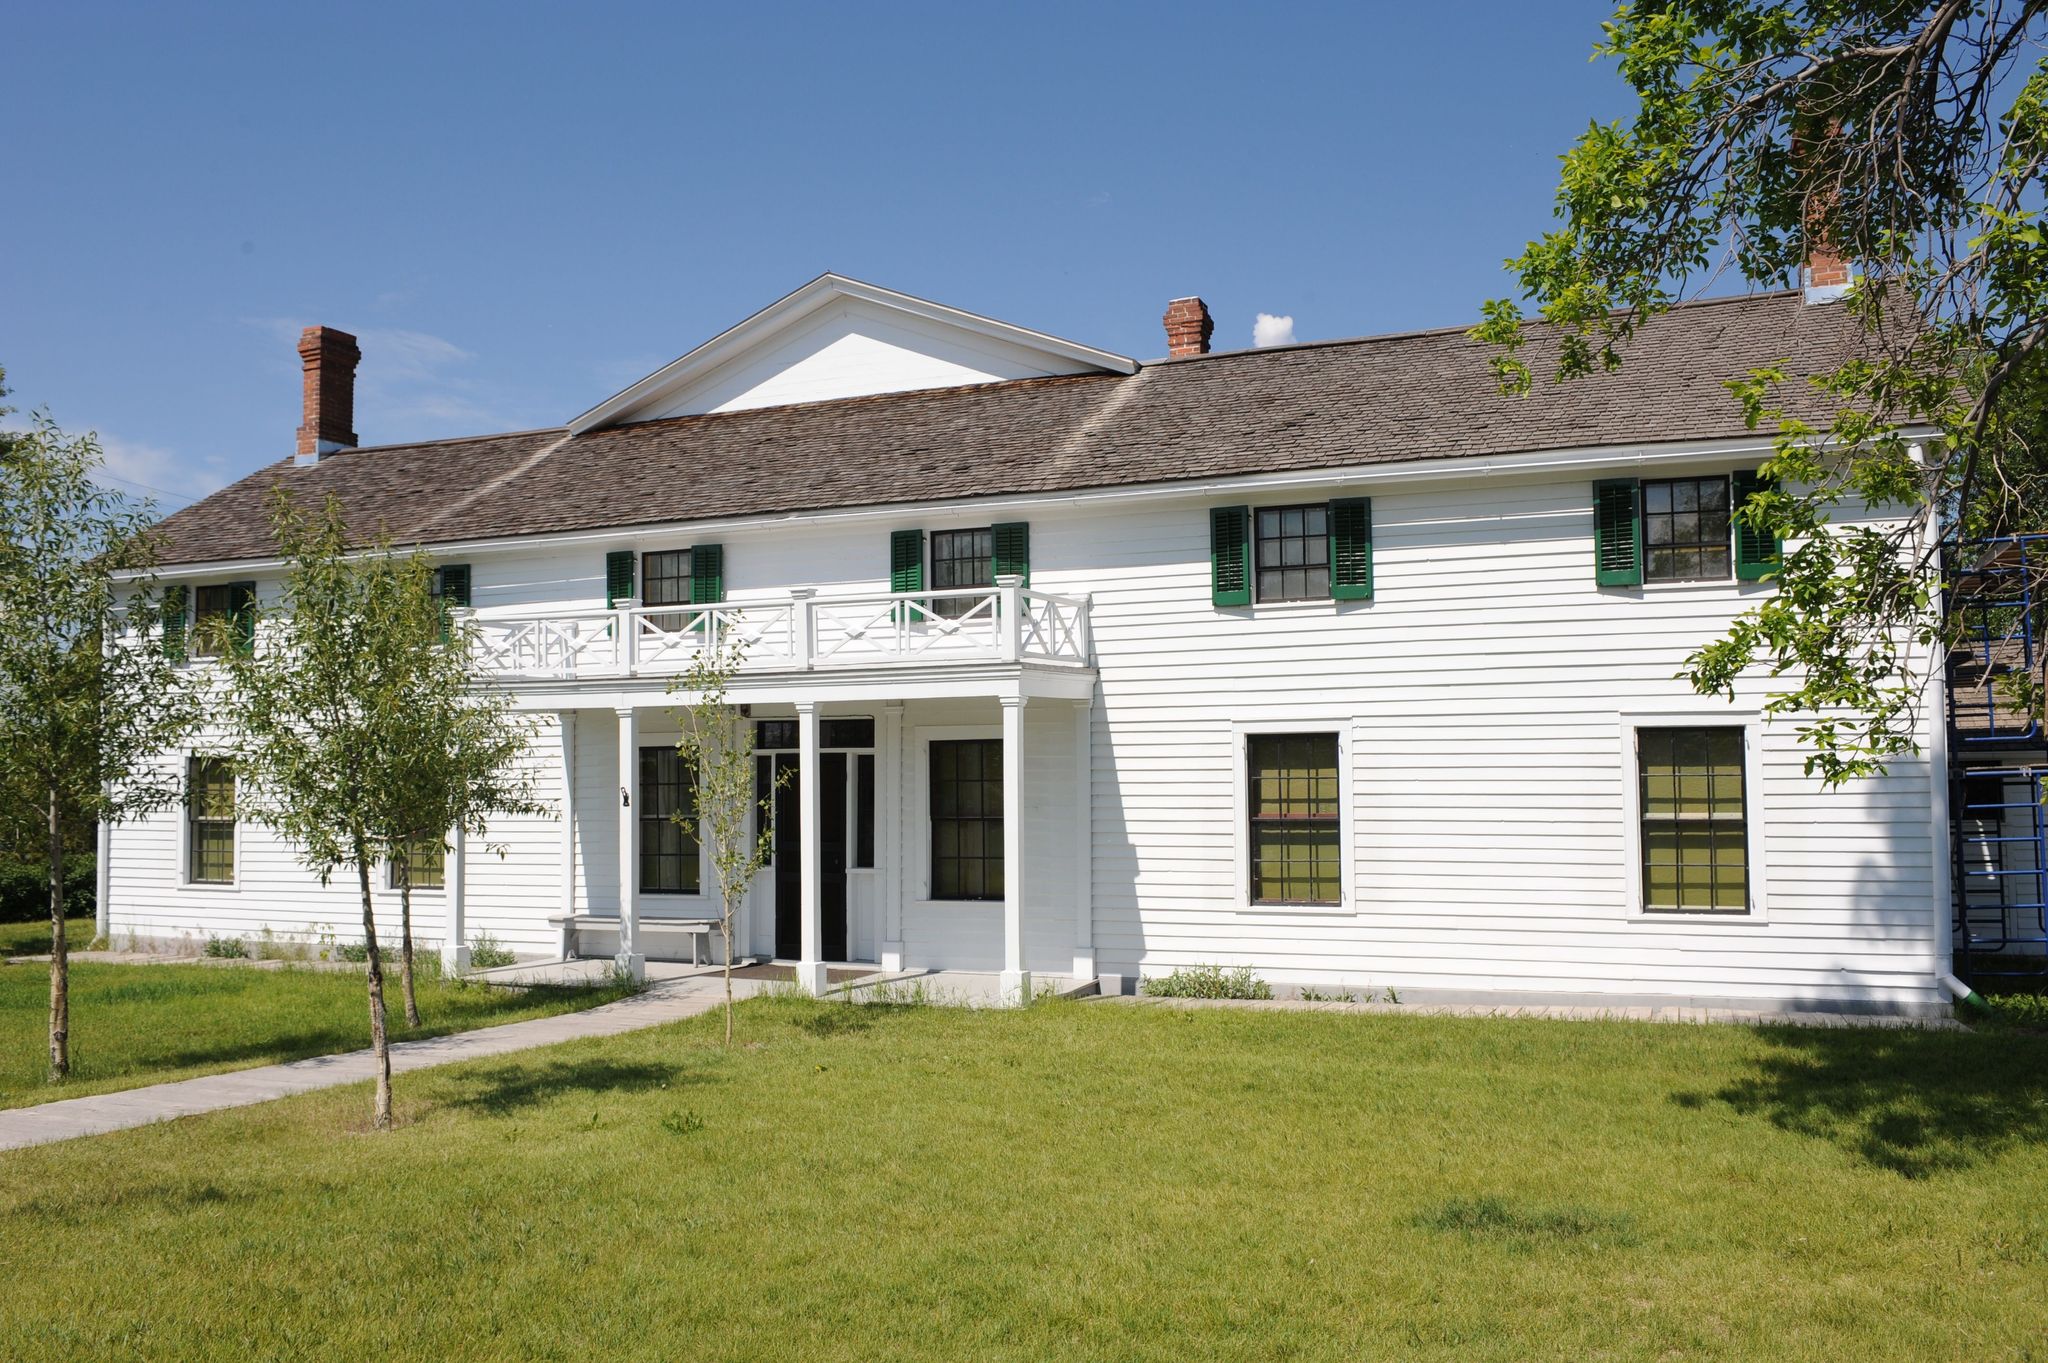 The front portion of the ranch house was originally built by Canadian fur trader Johnny Grant in 1862.